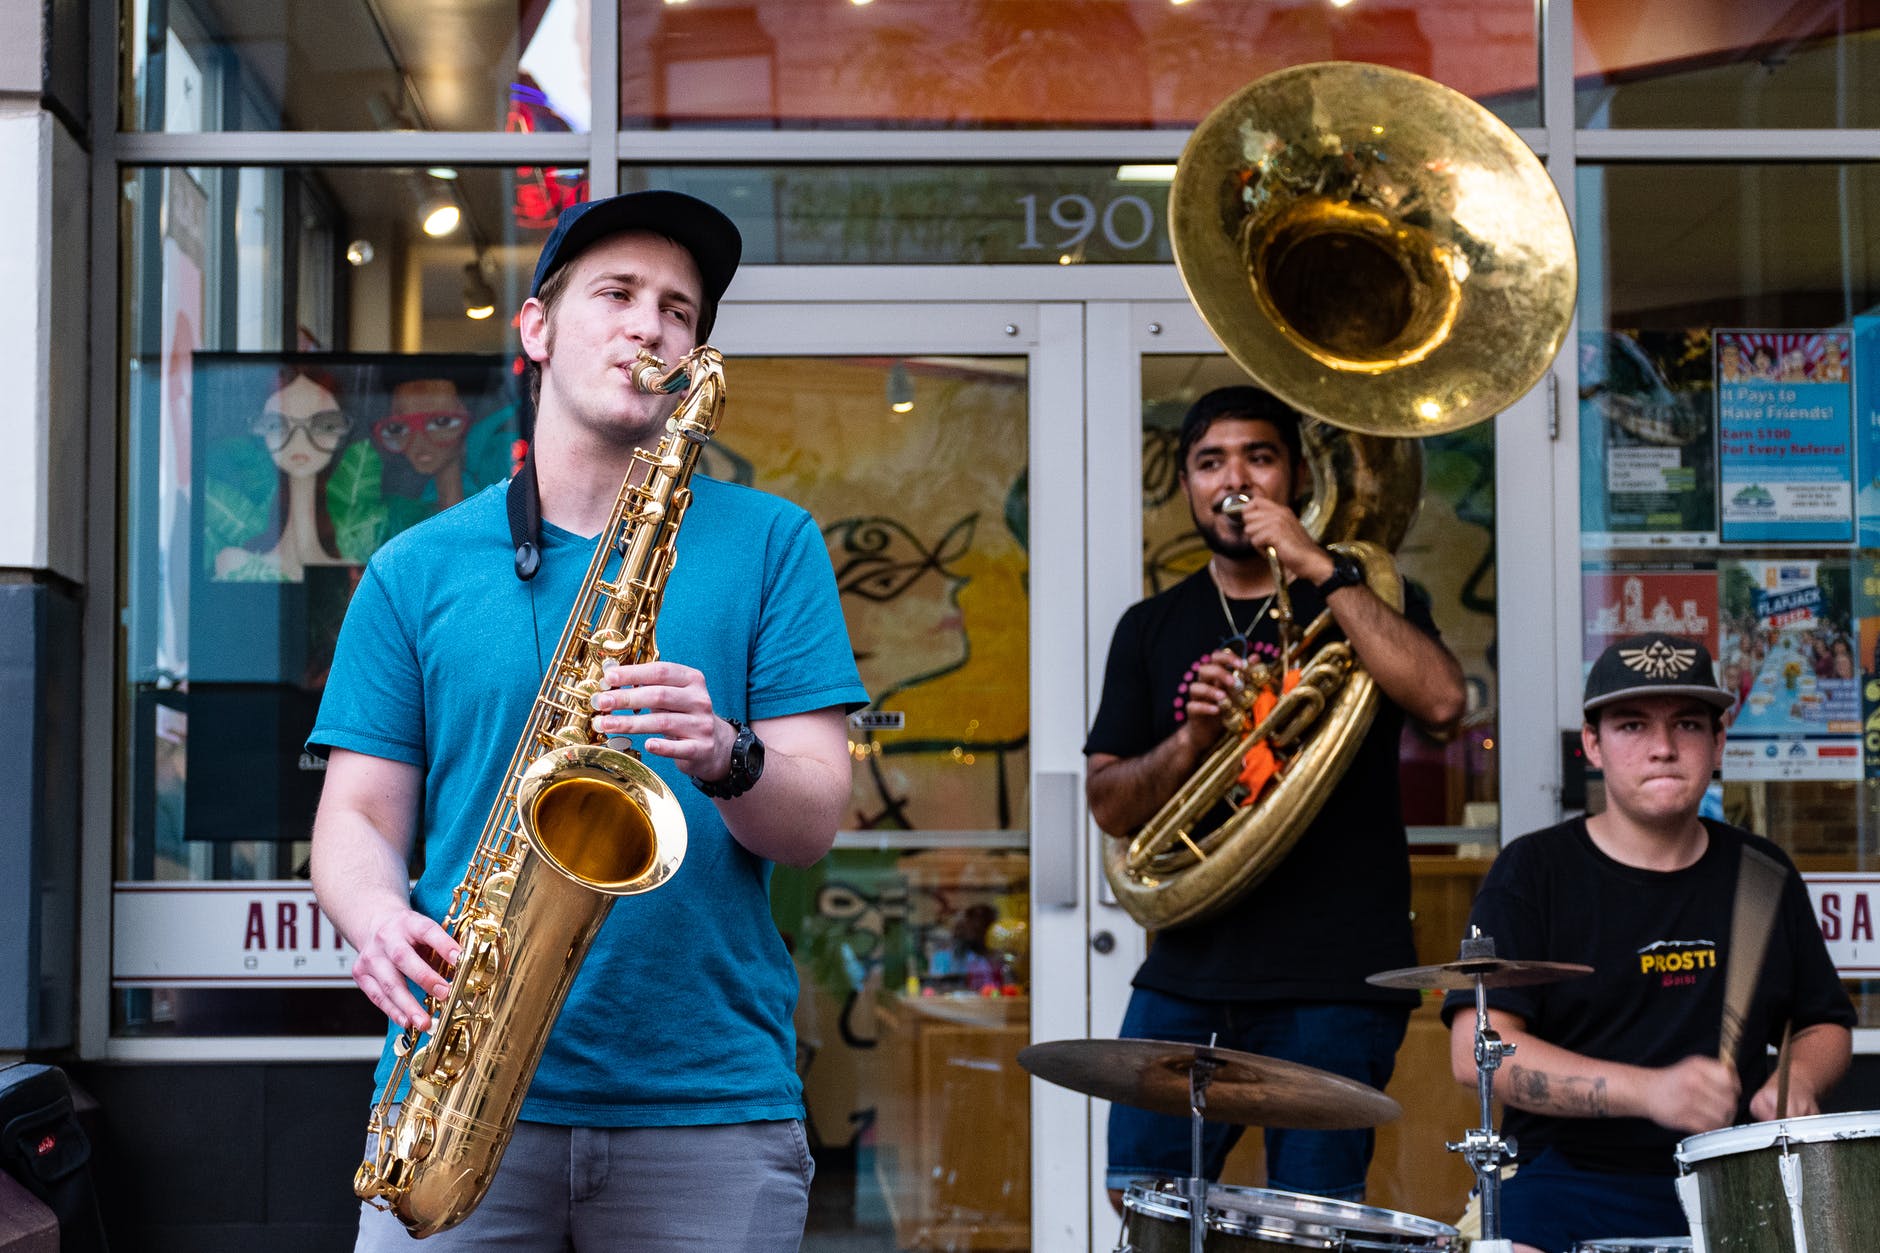 three man playing drums and wind instruments in front of store